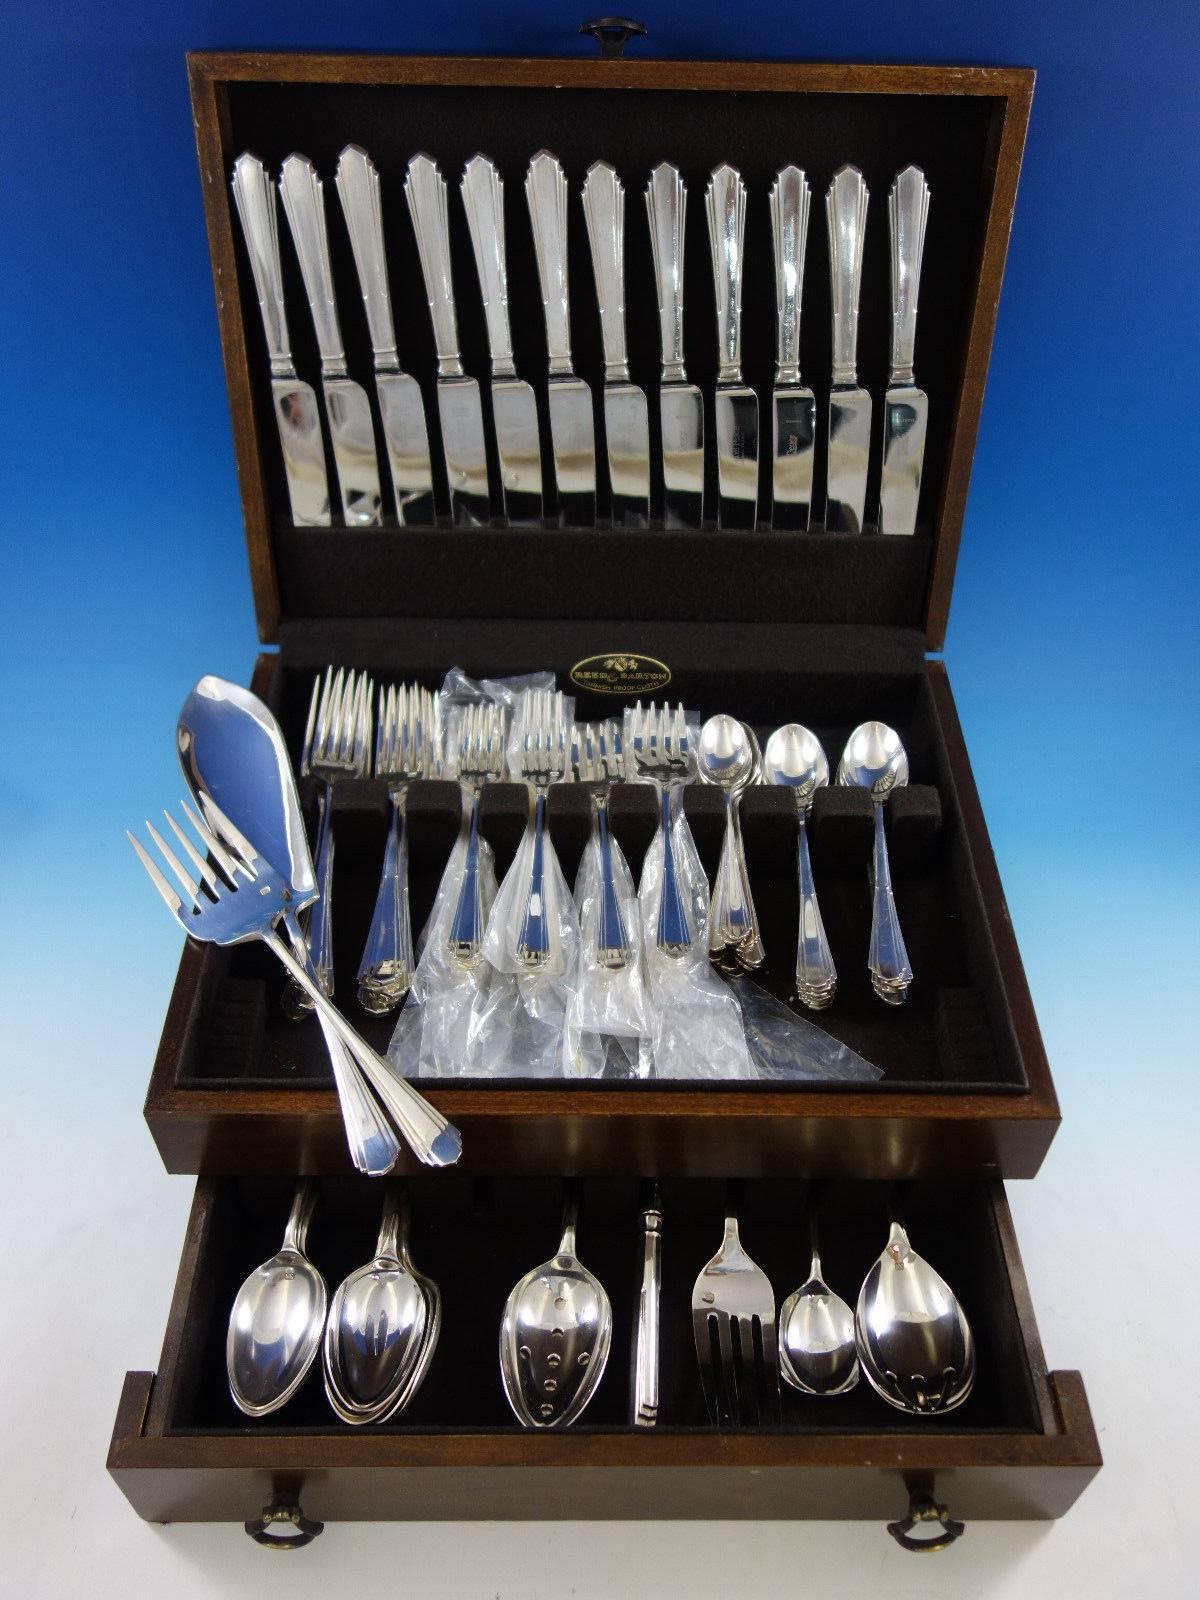 Lisa by Samuel Peace Sheffield England silver plated flatware set, 93 pieces. This set includes: 

12 knives, 9 1/8